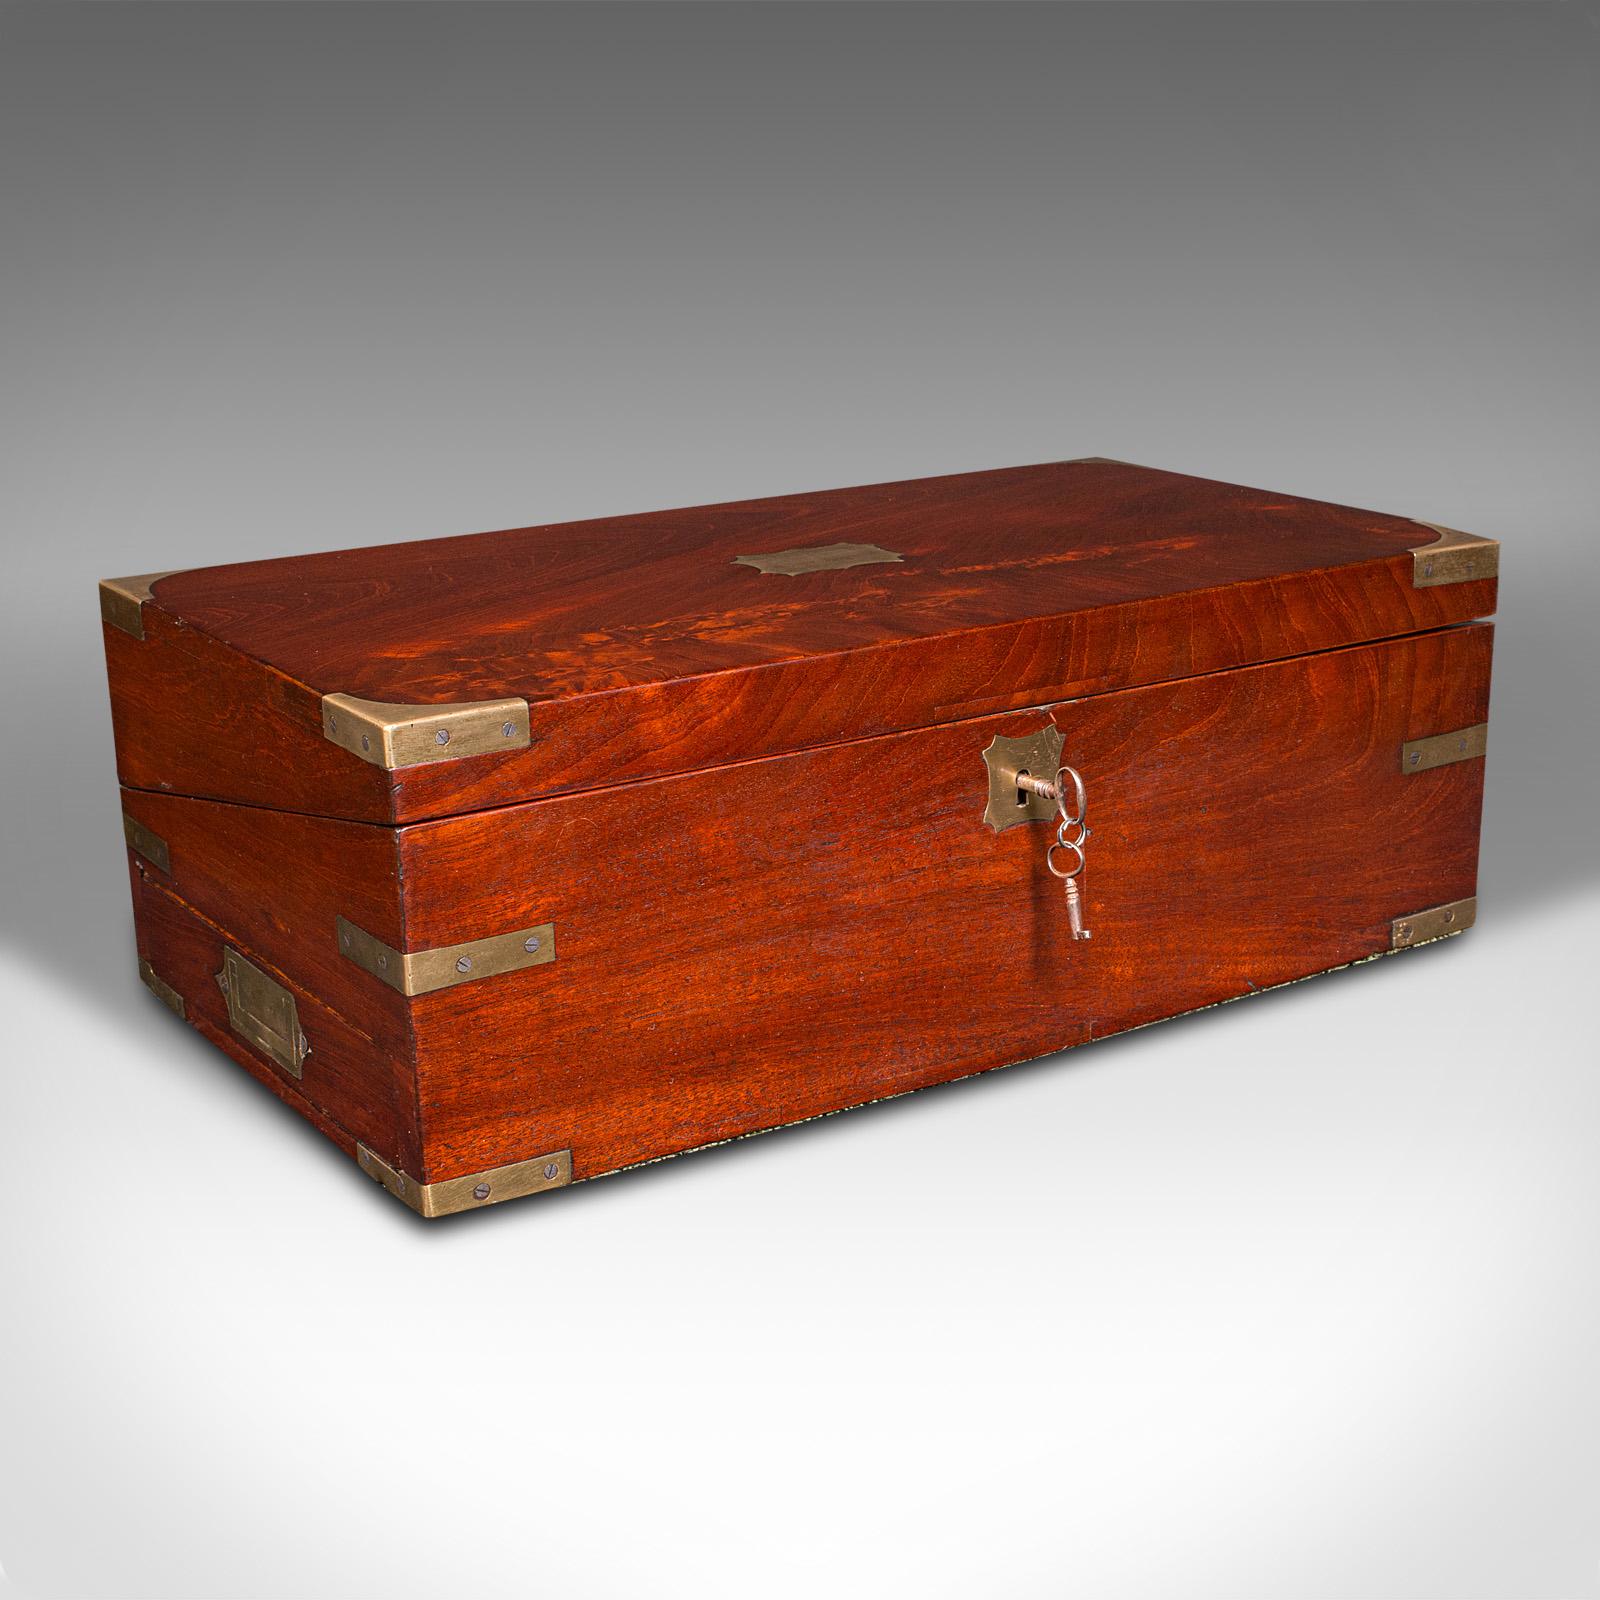 This is an antique officer’s campaign correspondence box. An English, flame mahogany and leather writing case, dating to the Regency period, circa 1820.

Delightfully attractive box, with fascinating secret drawers and quality finishes
Displays a